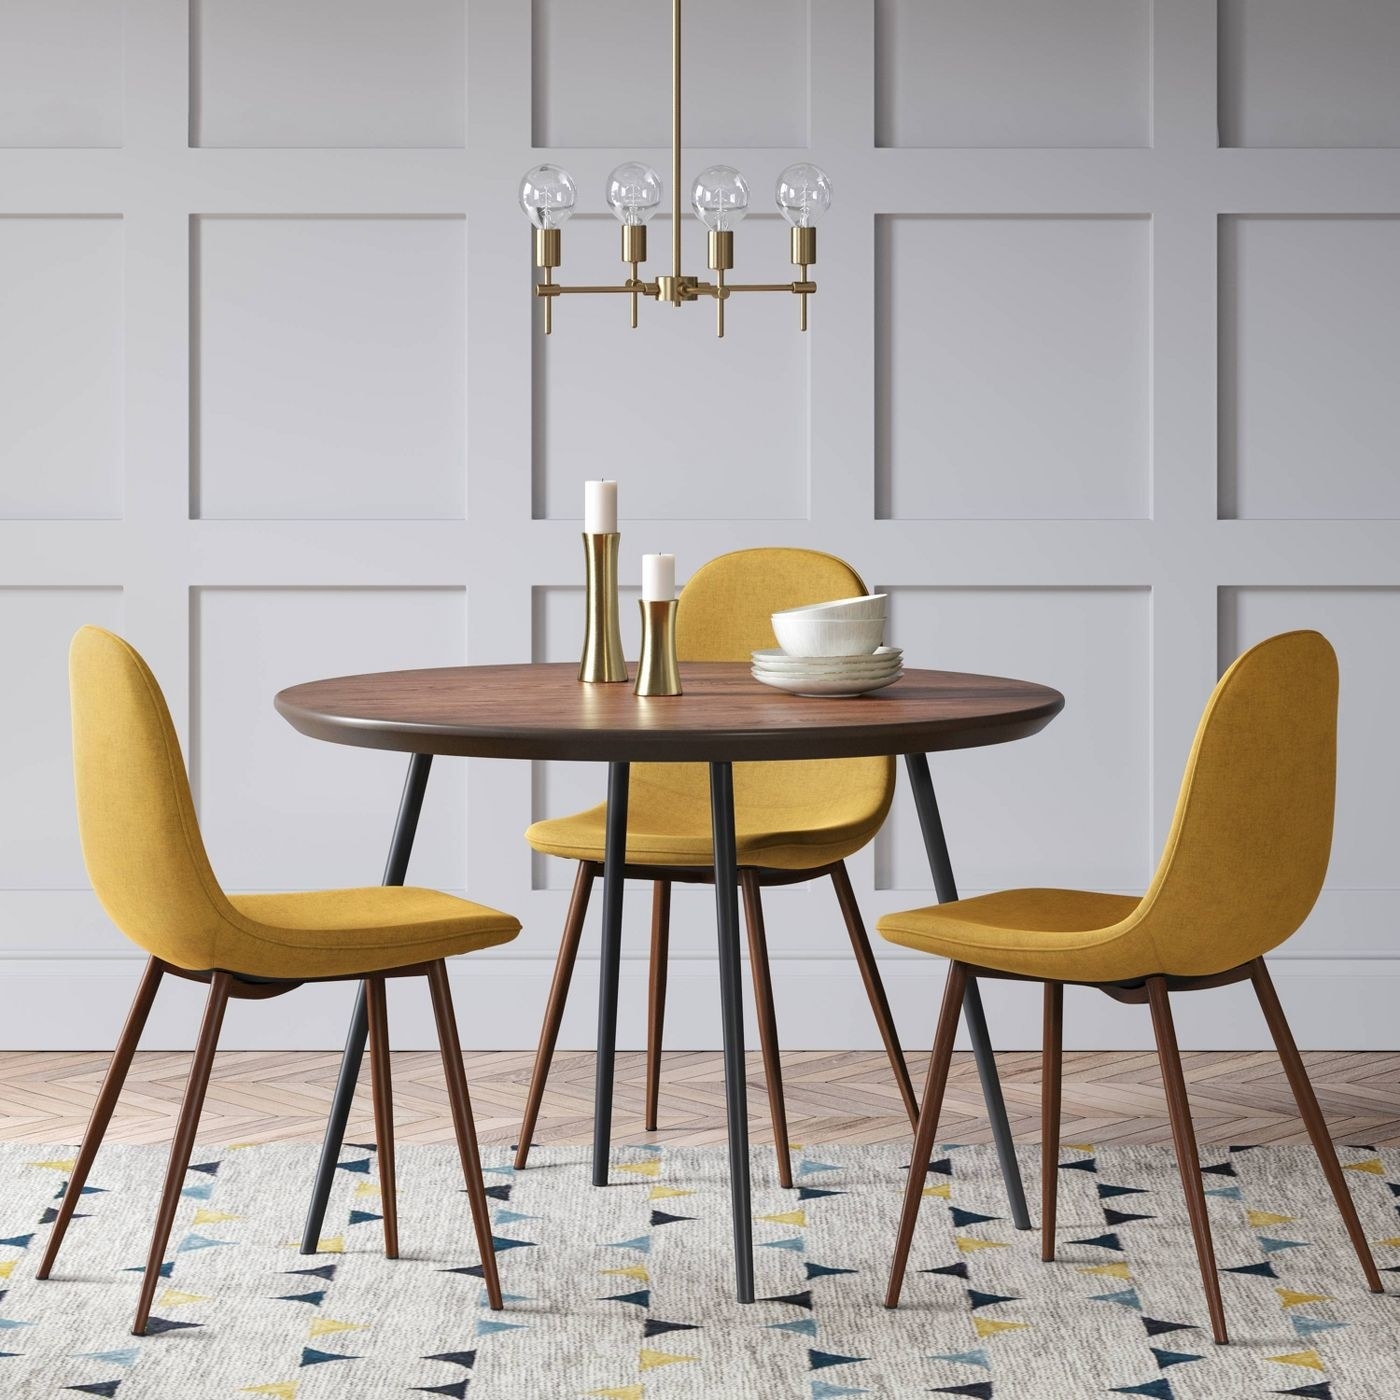 Three yellow chairs around a dining room table